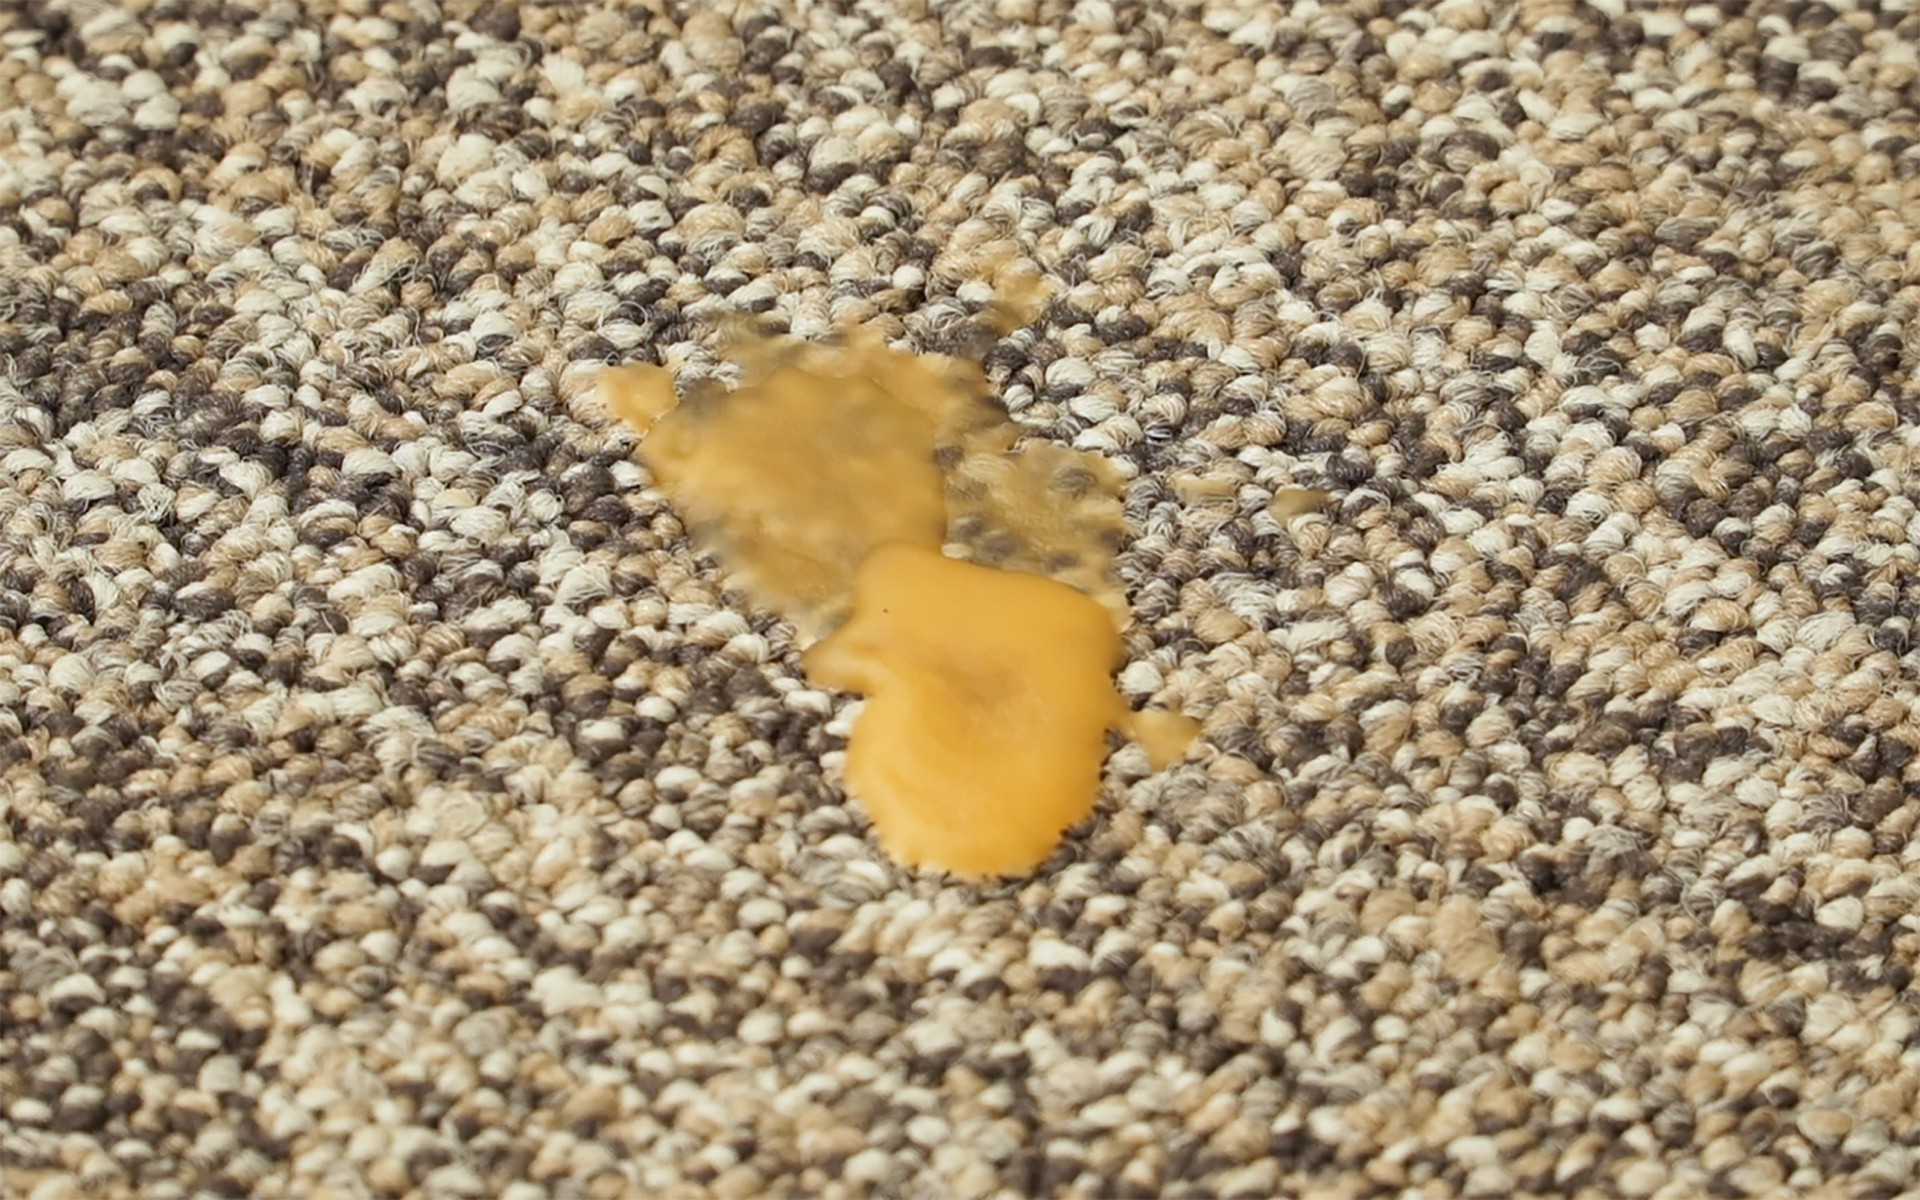 How to Remove Wax from Carpet